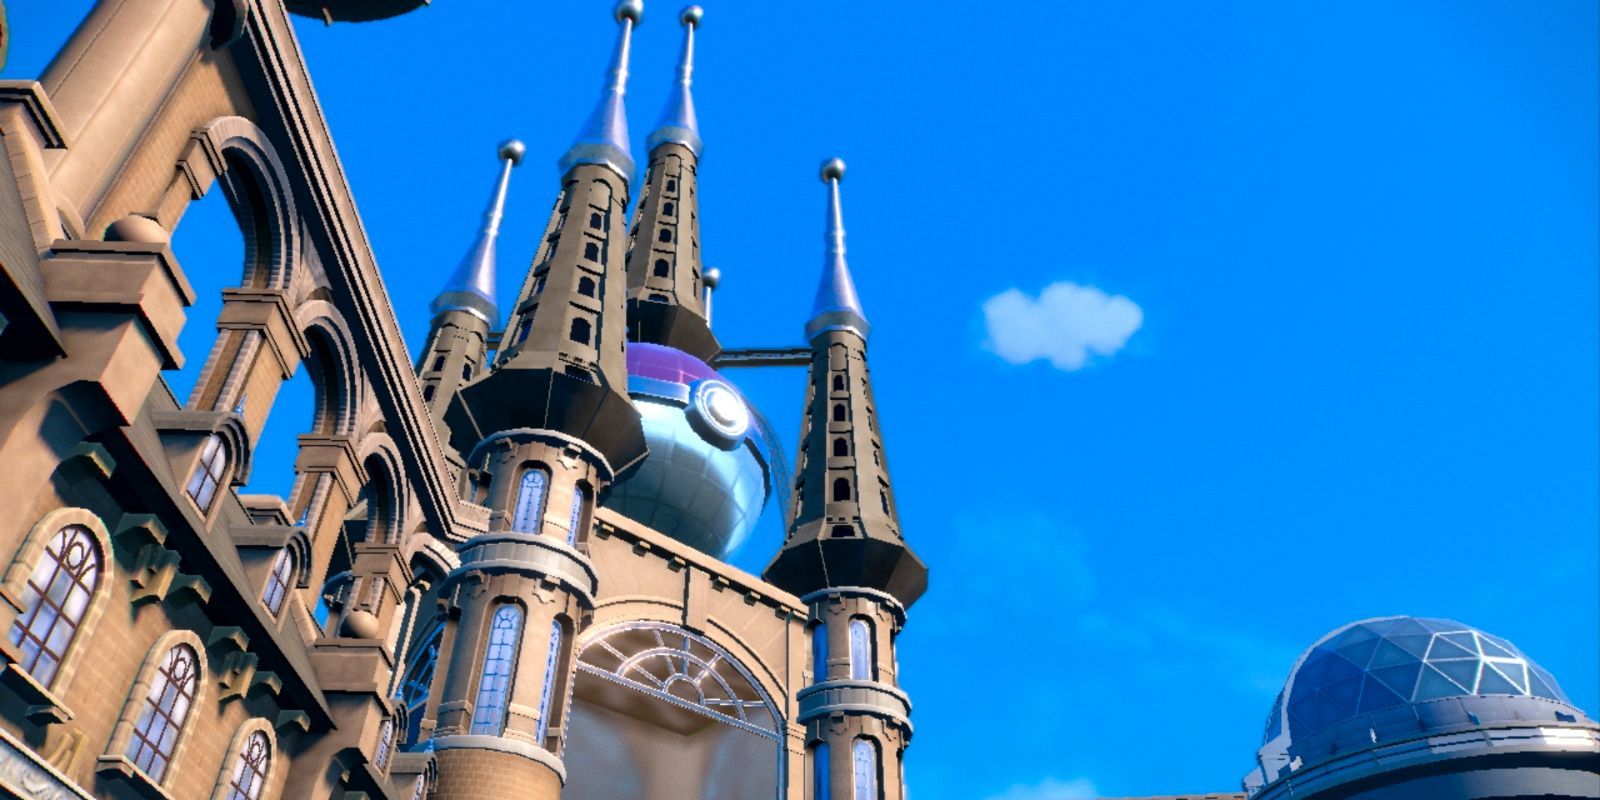 Pokemon Scarlet And Violets Region Could Be Based On Spain Church Building With Poke Ball